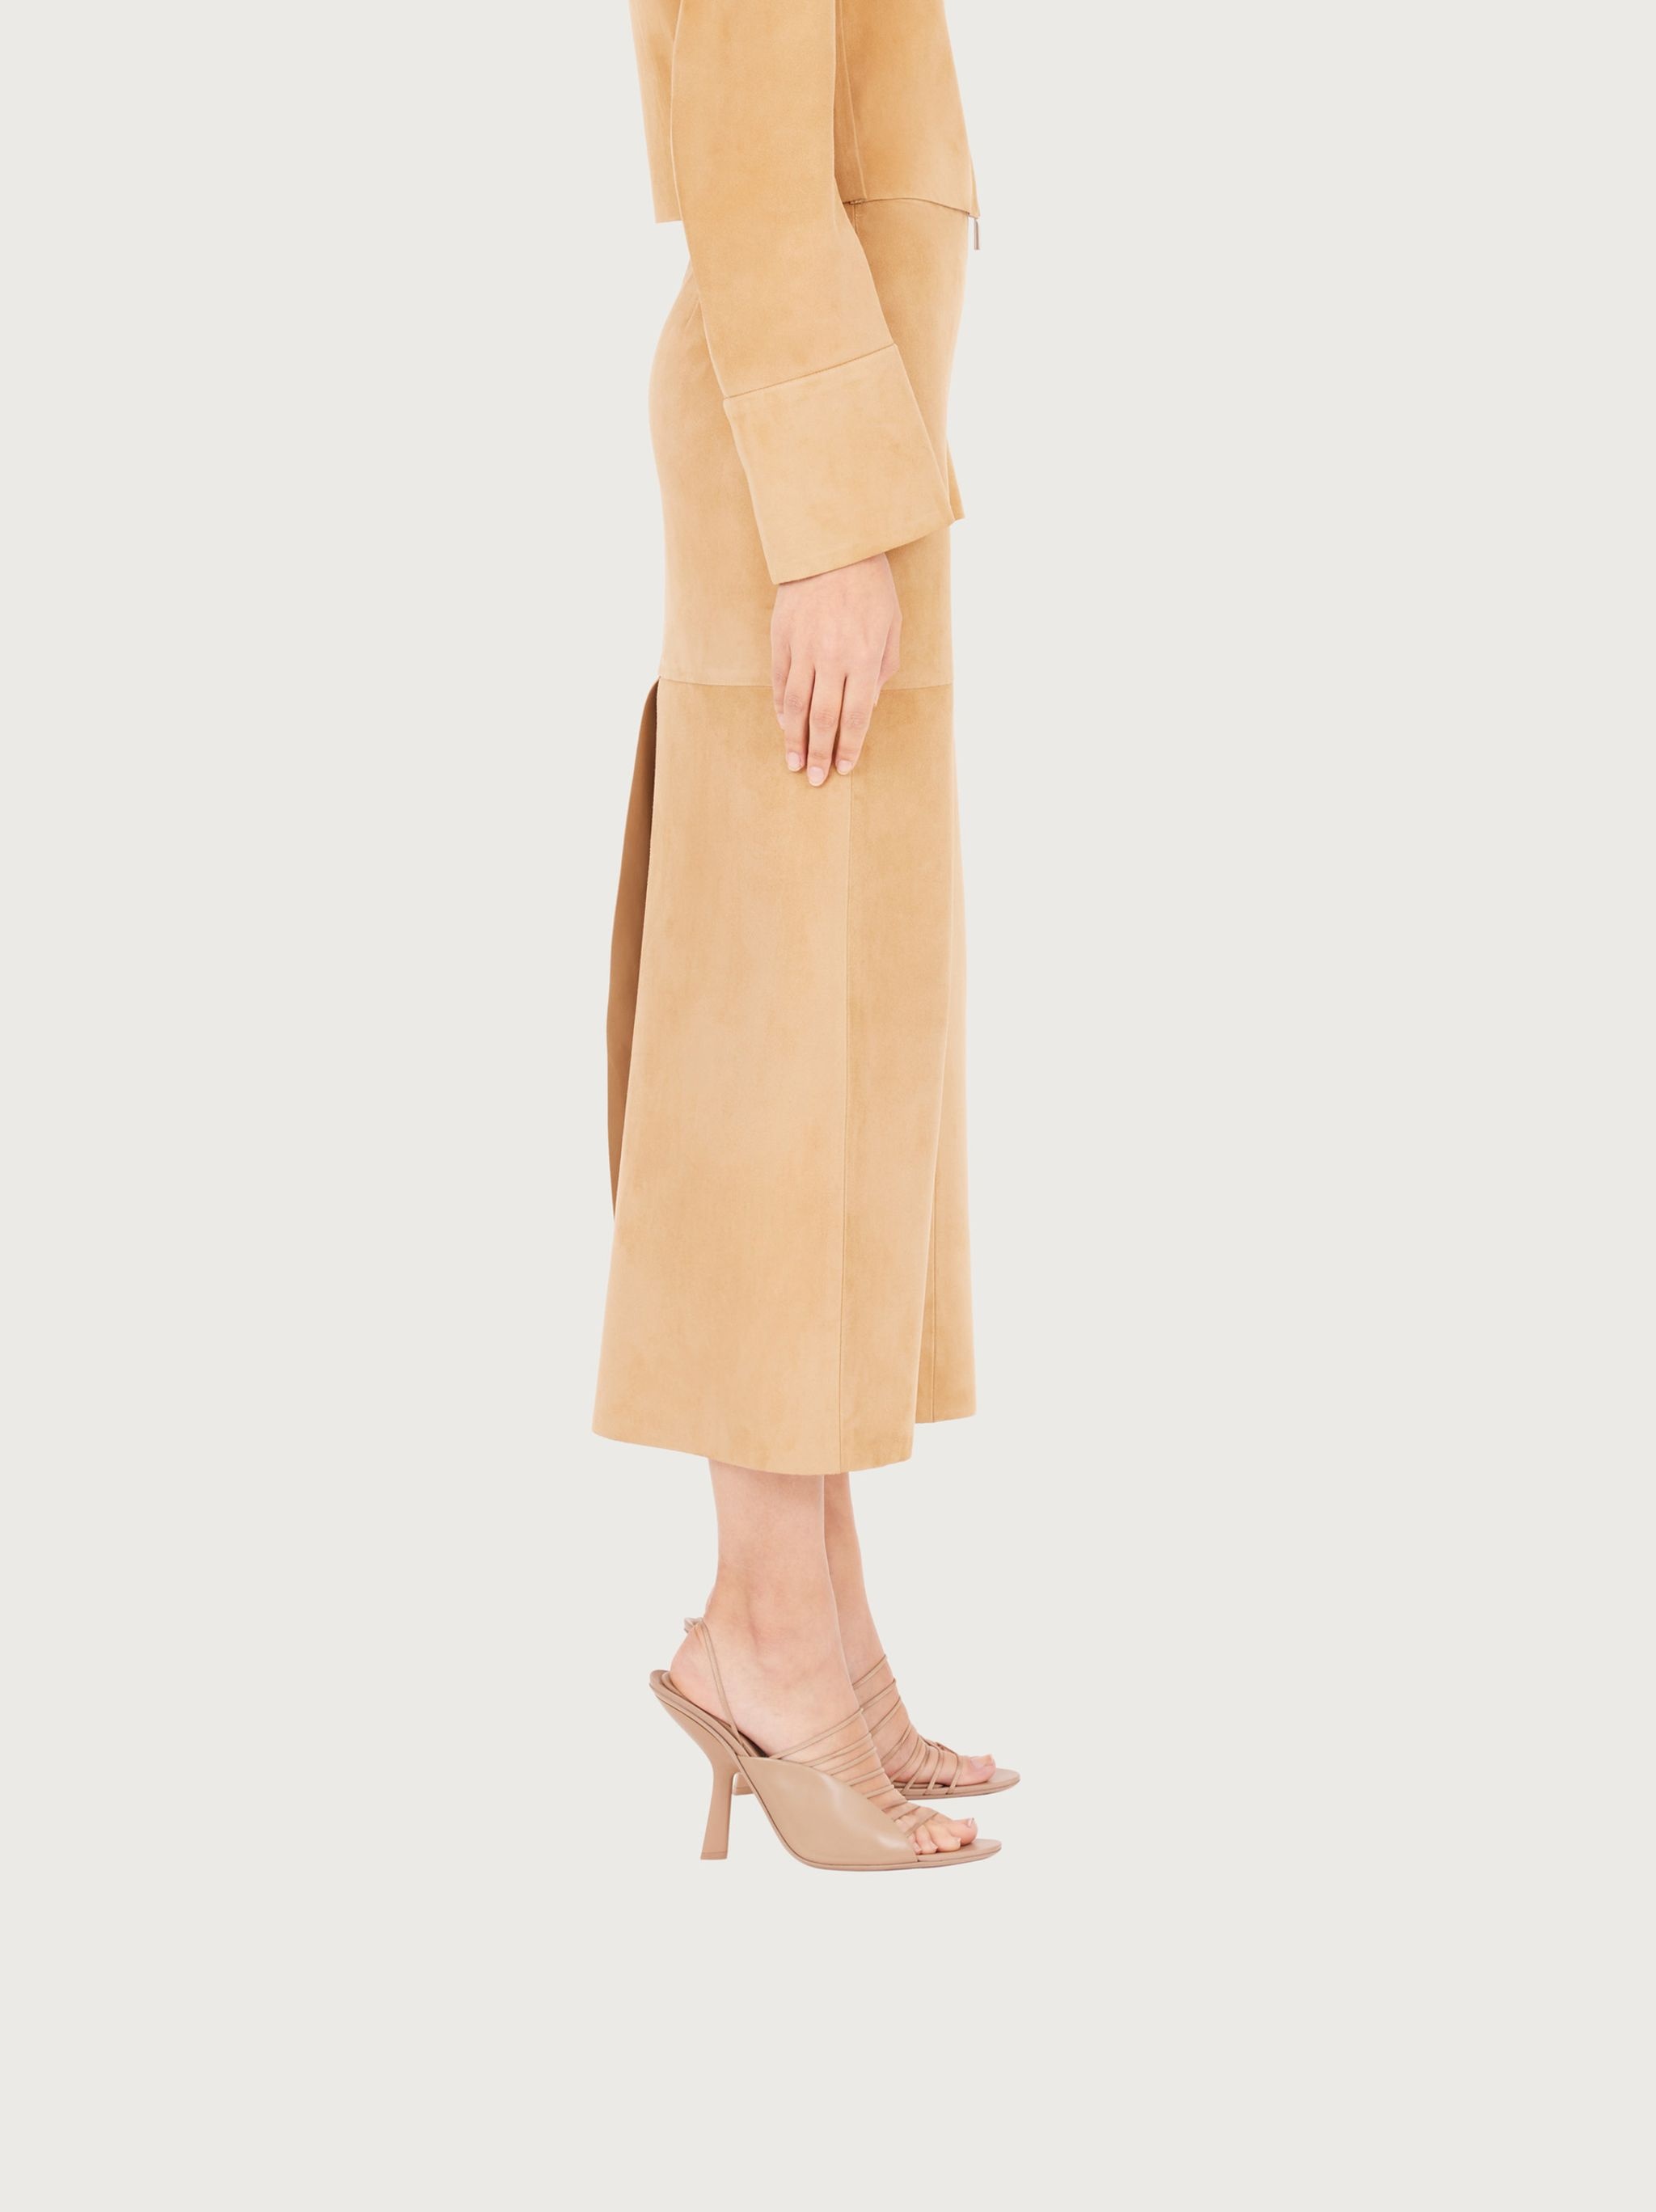 Suede long skirt - 3